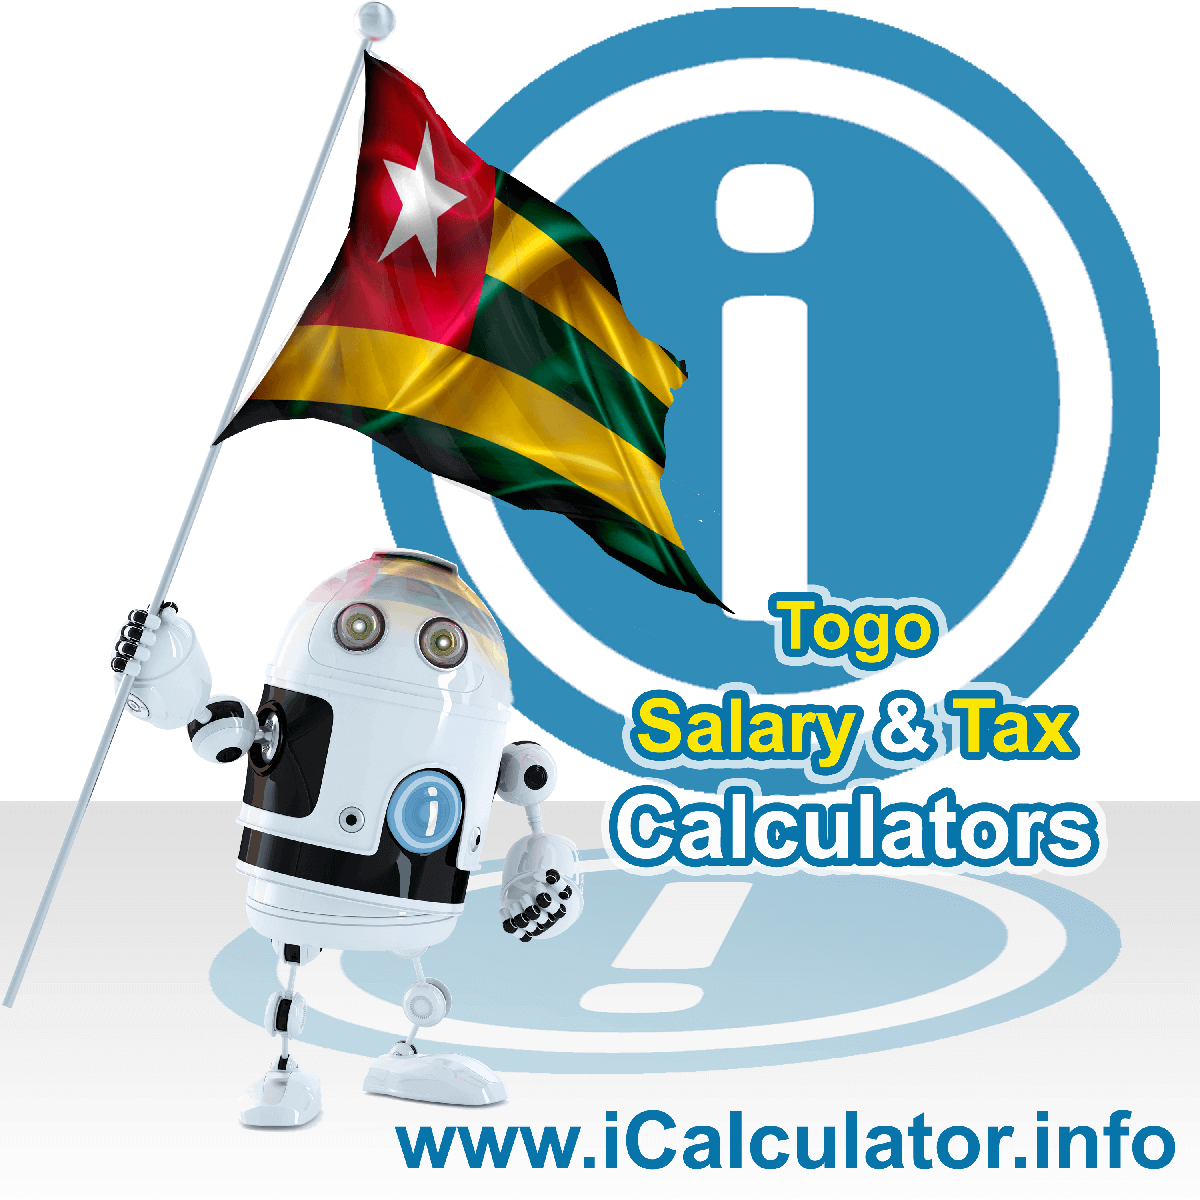 Togo Tax Calculator. This image shows the Togo flag and information relating to the tax formula for the Togo Salary Calculator